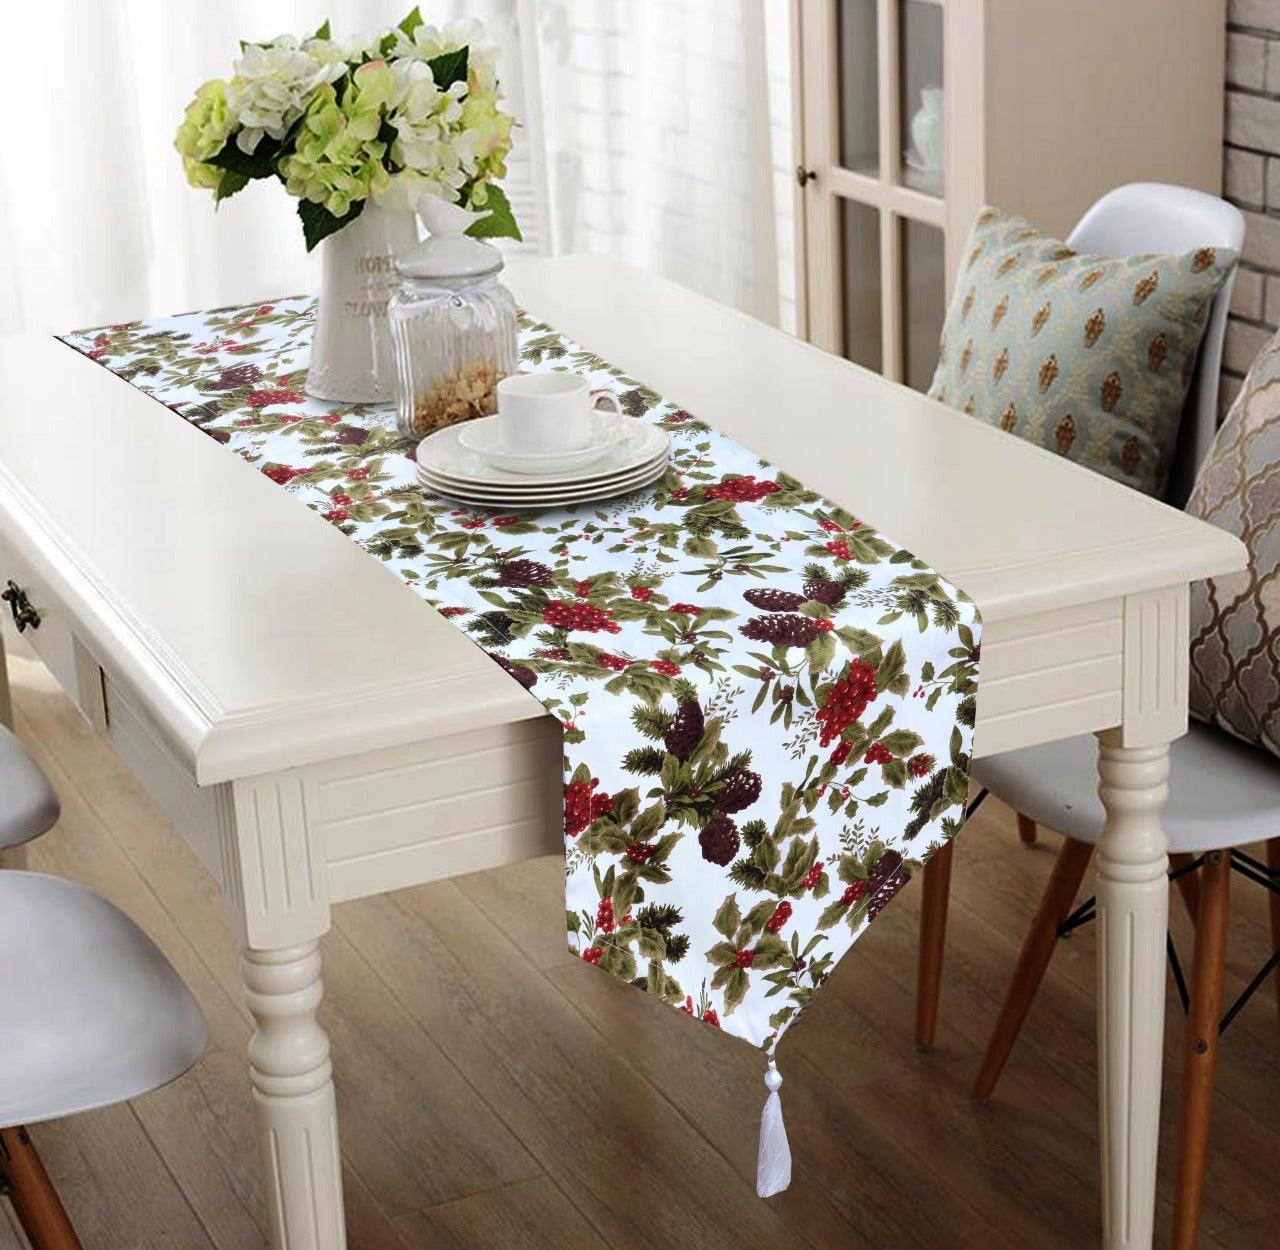 7 pcs Printed Table Runner Set With Place Mats 06 - 92Bedding